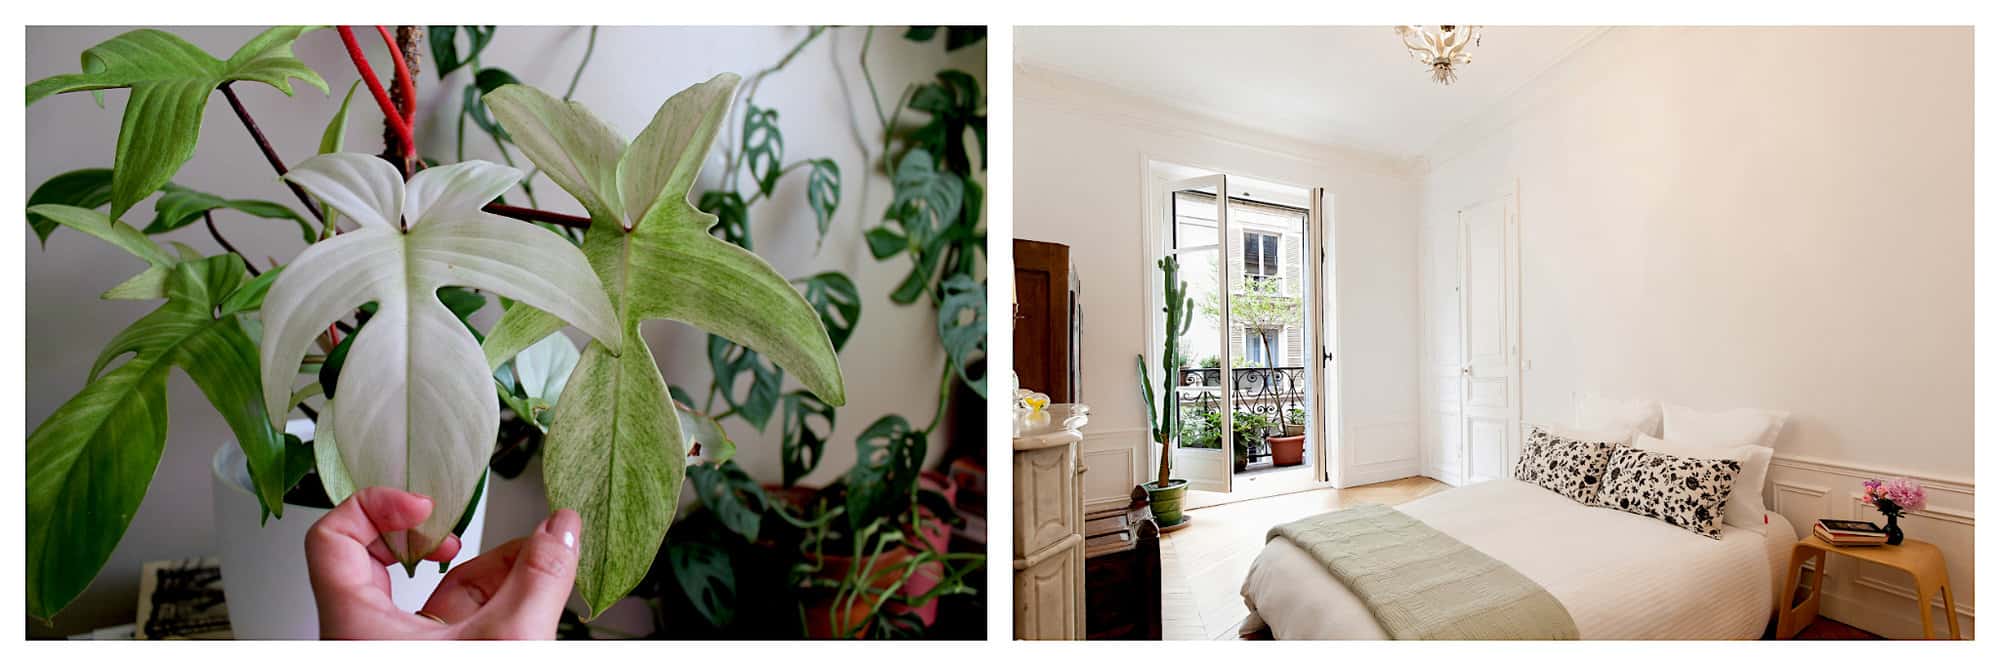 Left: A picture of a rare plant called Philodendron florida ghost. This plant is coveted for its charming white leaves that mature to green. In this photo, we can see the comparison between a young leaf that is white and another leaf that is turning green.  Right: A spacious Parisian bedroom with a tall french windows that open to a balcony full of plants. Beside the window is also a tall cactus. The bed is beautifully decorated in white and green beddings. 2 pillows in black and white gives accent to the room.